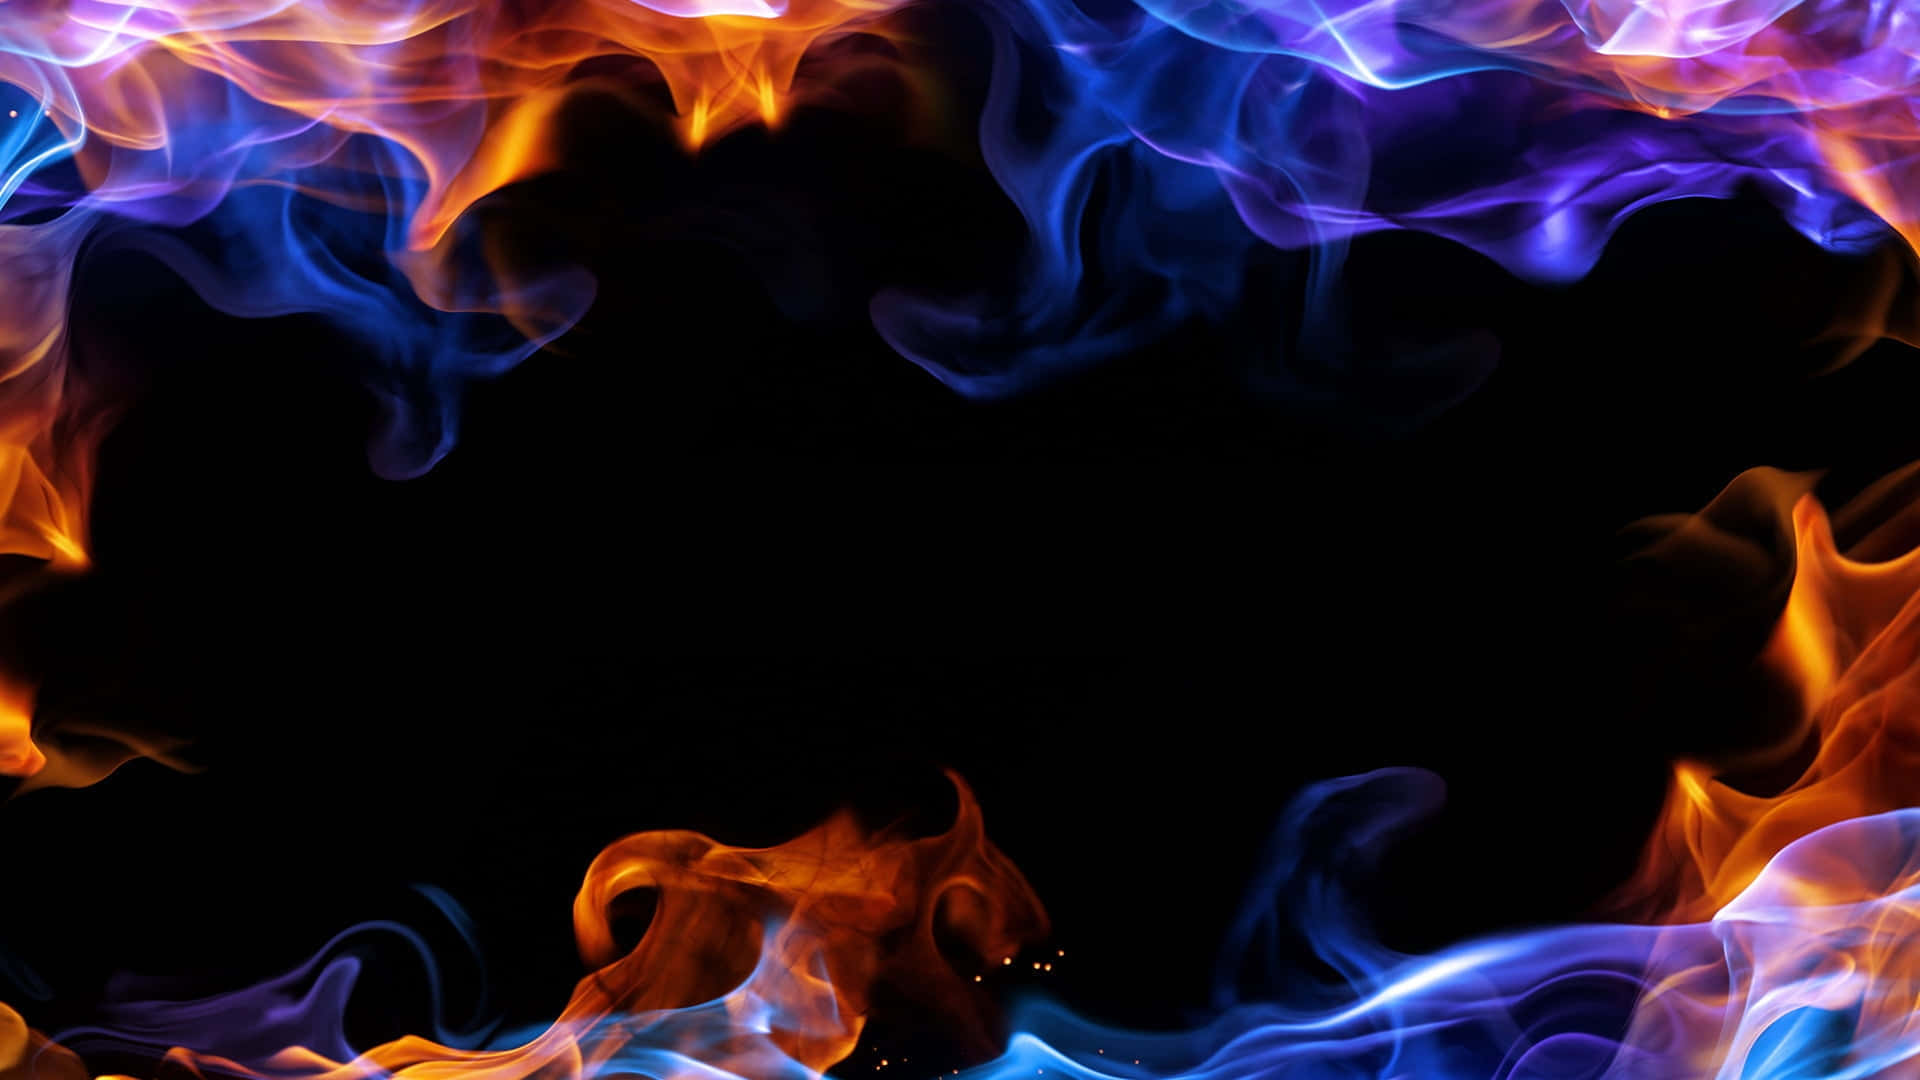 “Flames of Red and Blue” Wallpaper